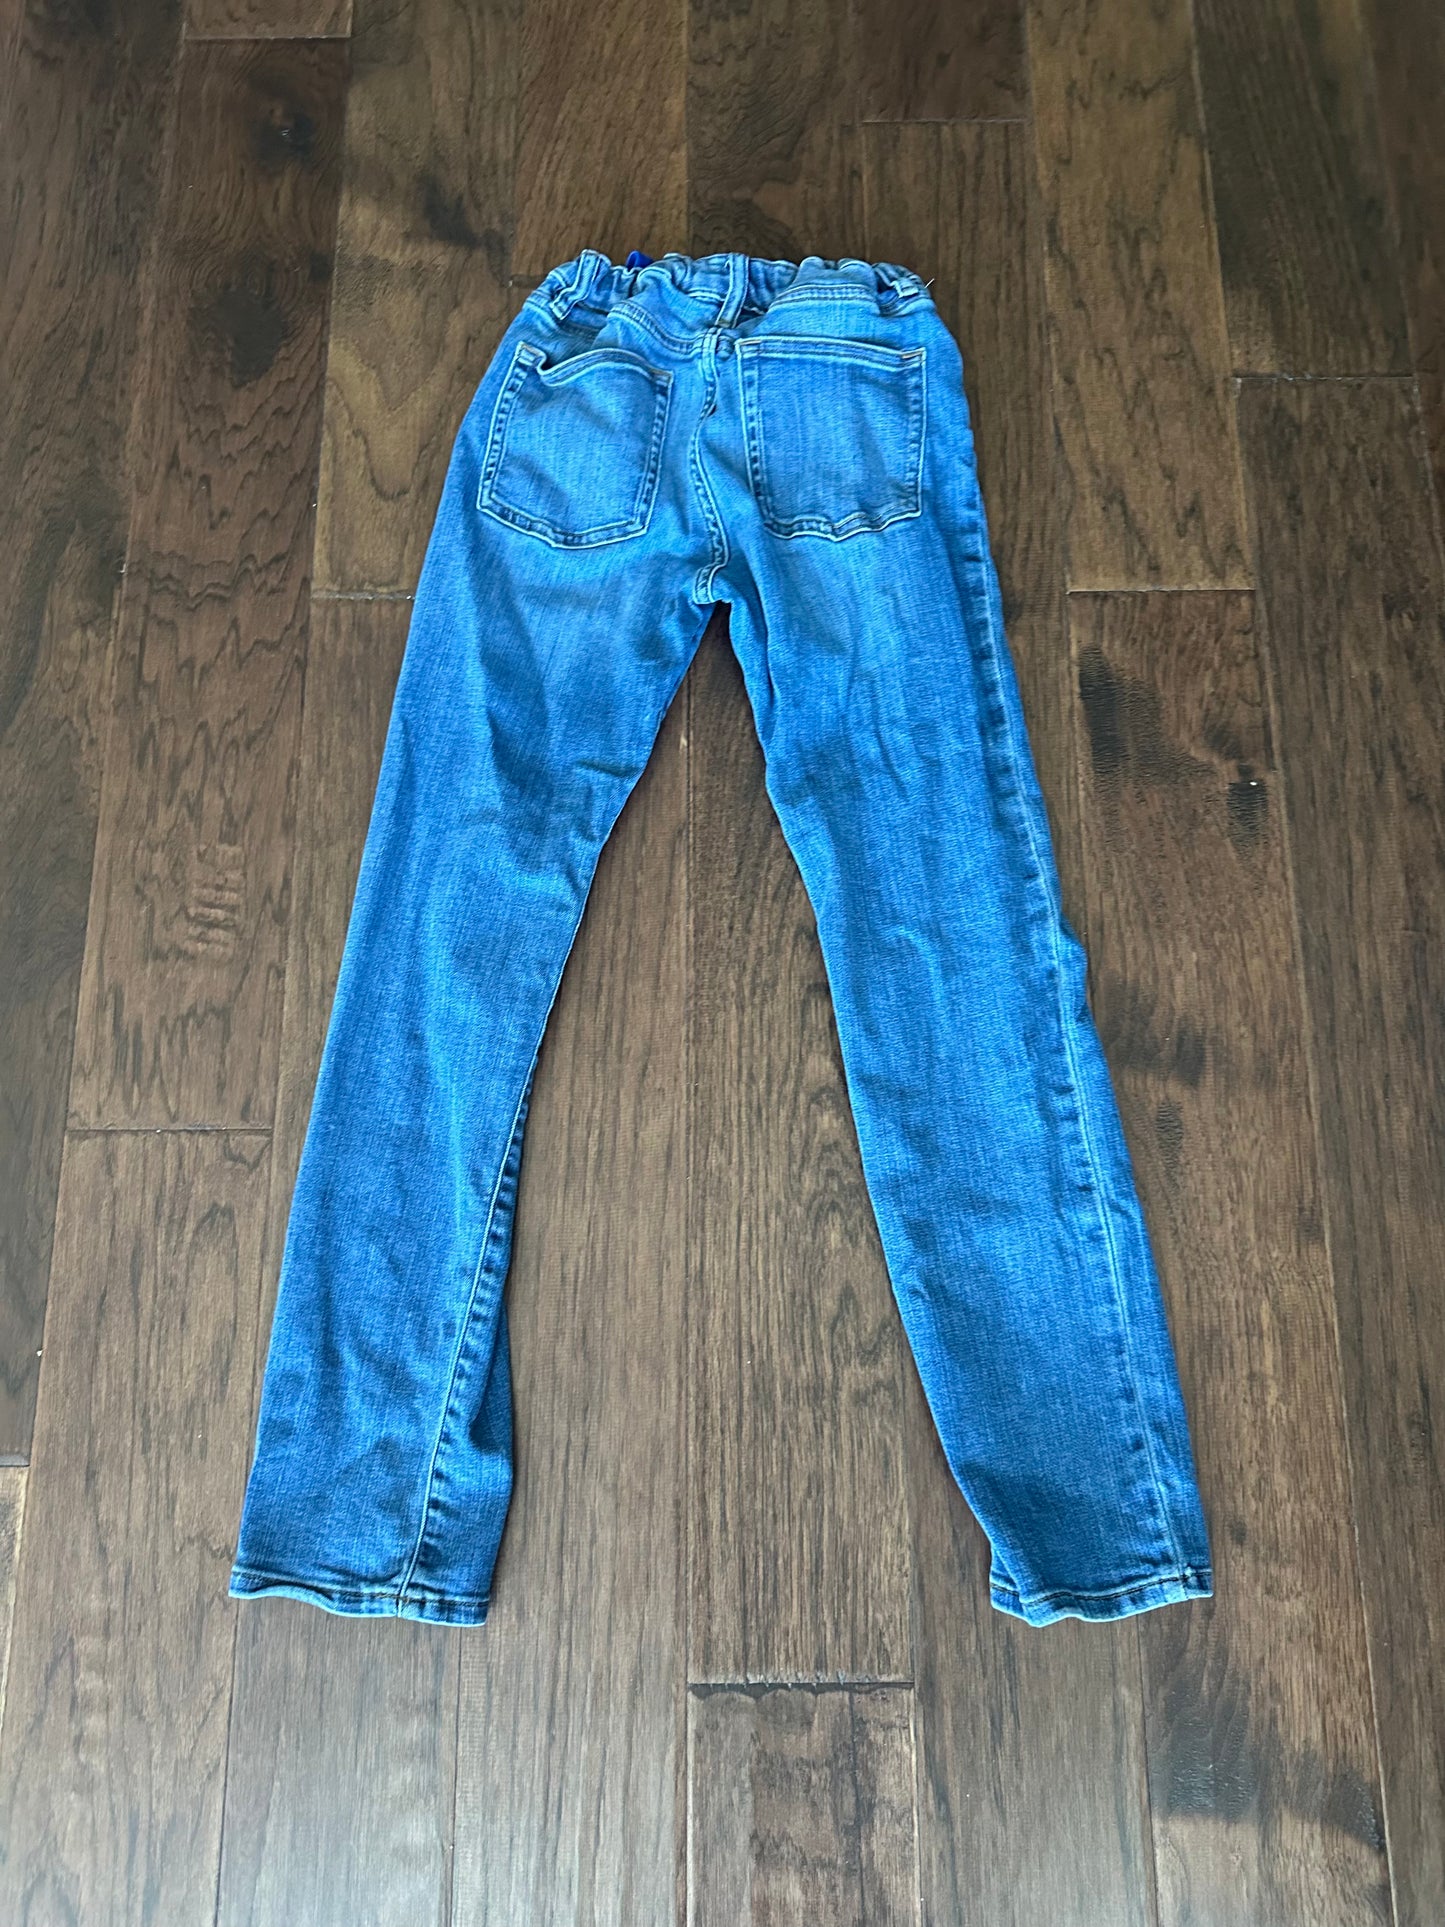 Crewcuts - Blue jeans - youth 12